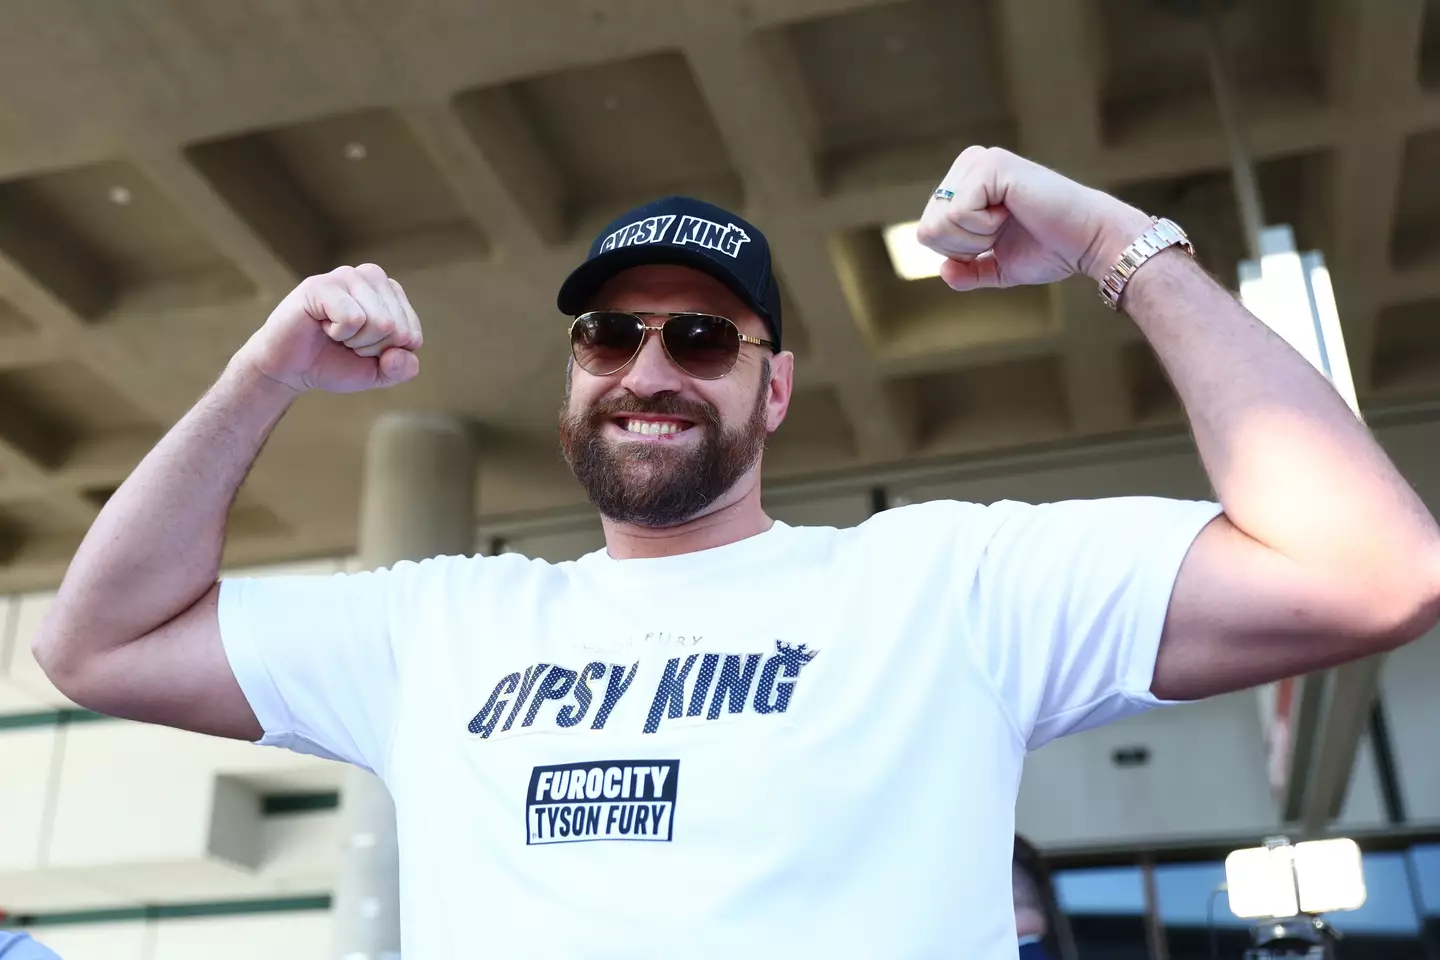 A report by the Daily Mail claims Tyson Fury has turned down millions for more seasons with Netflix.